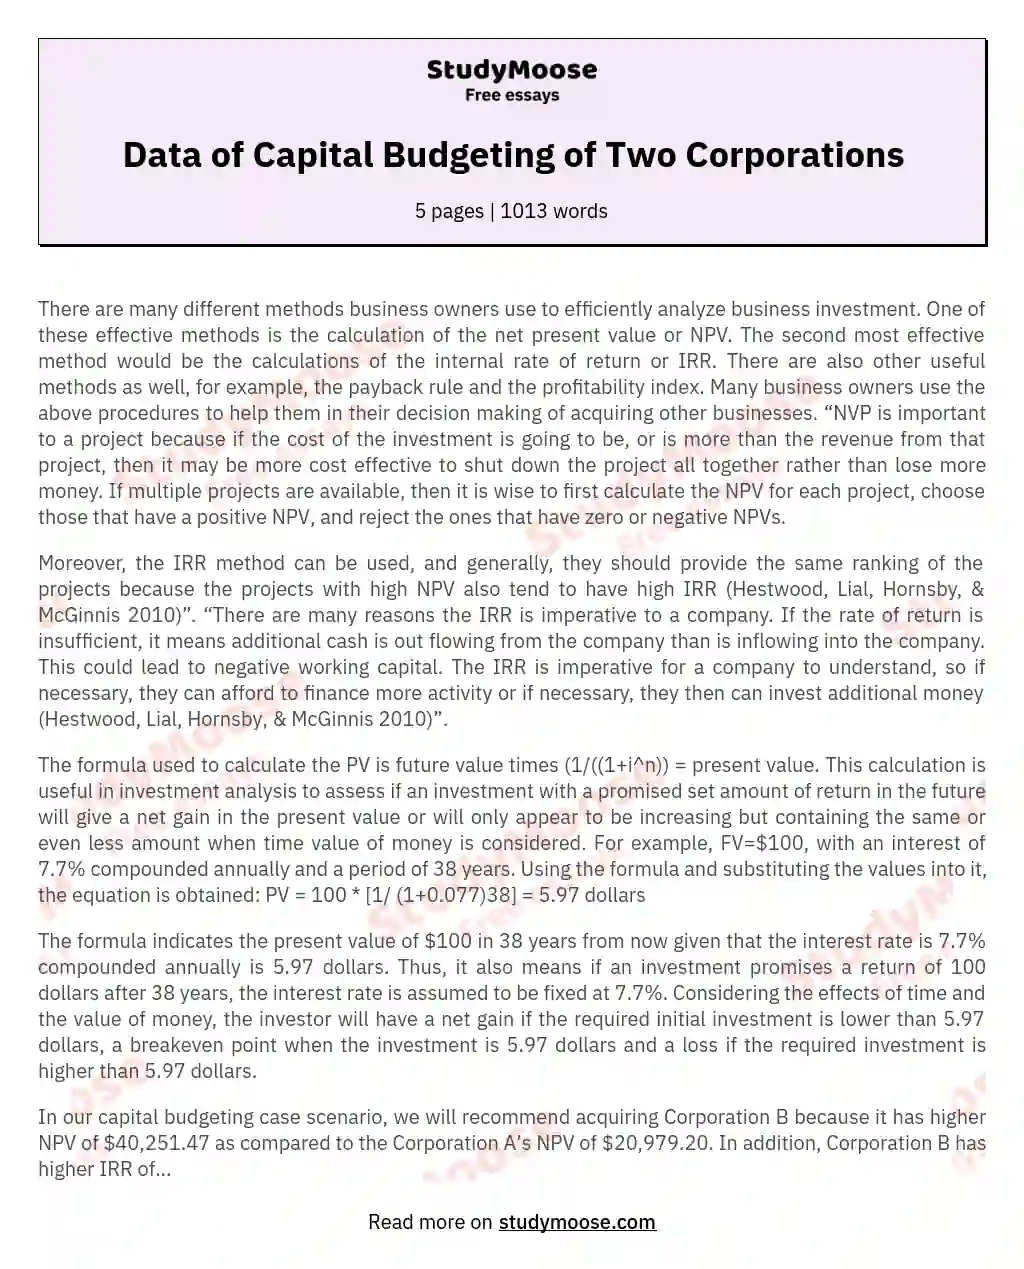 Data of Capital Budgeting of Two Corporations